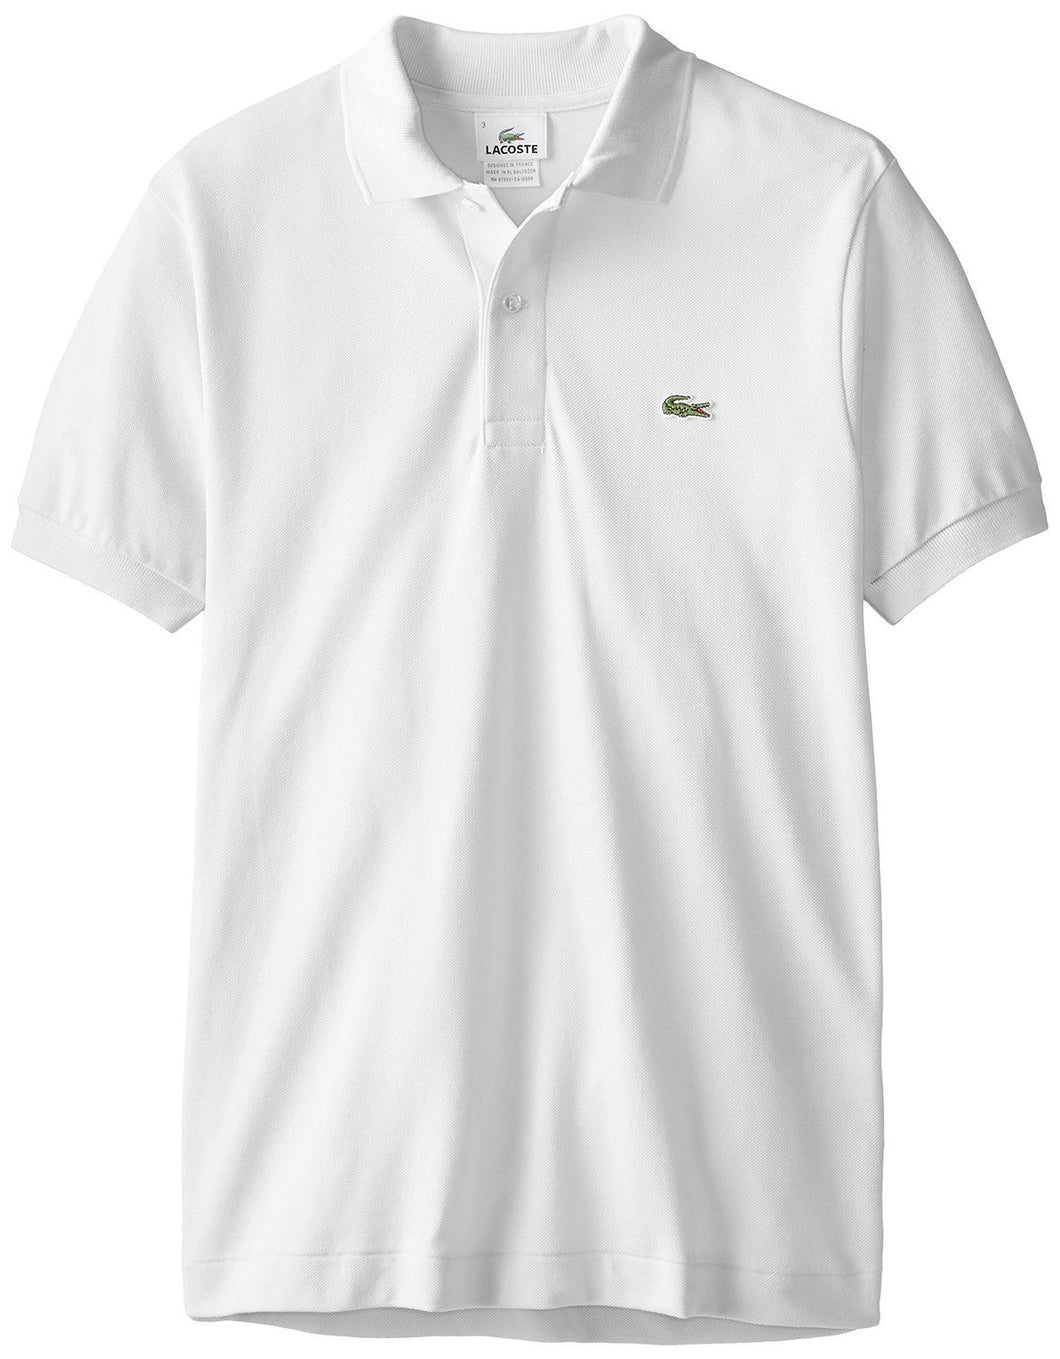 Lacoste Polo Shirt in Navy - classic two button cotton pique, short sleeve